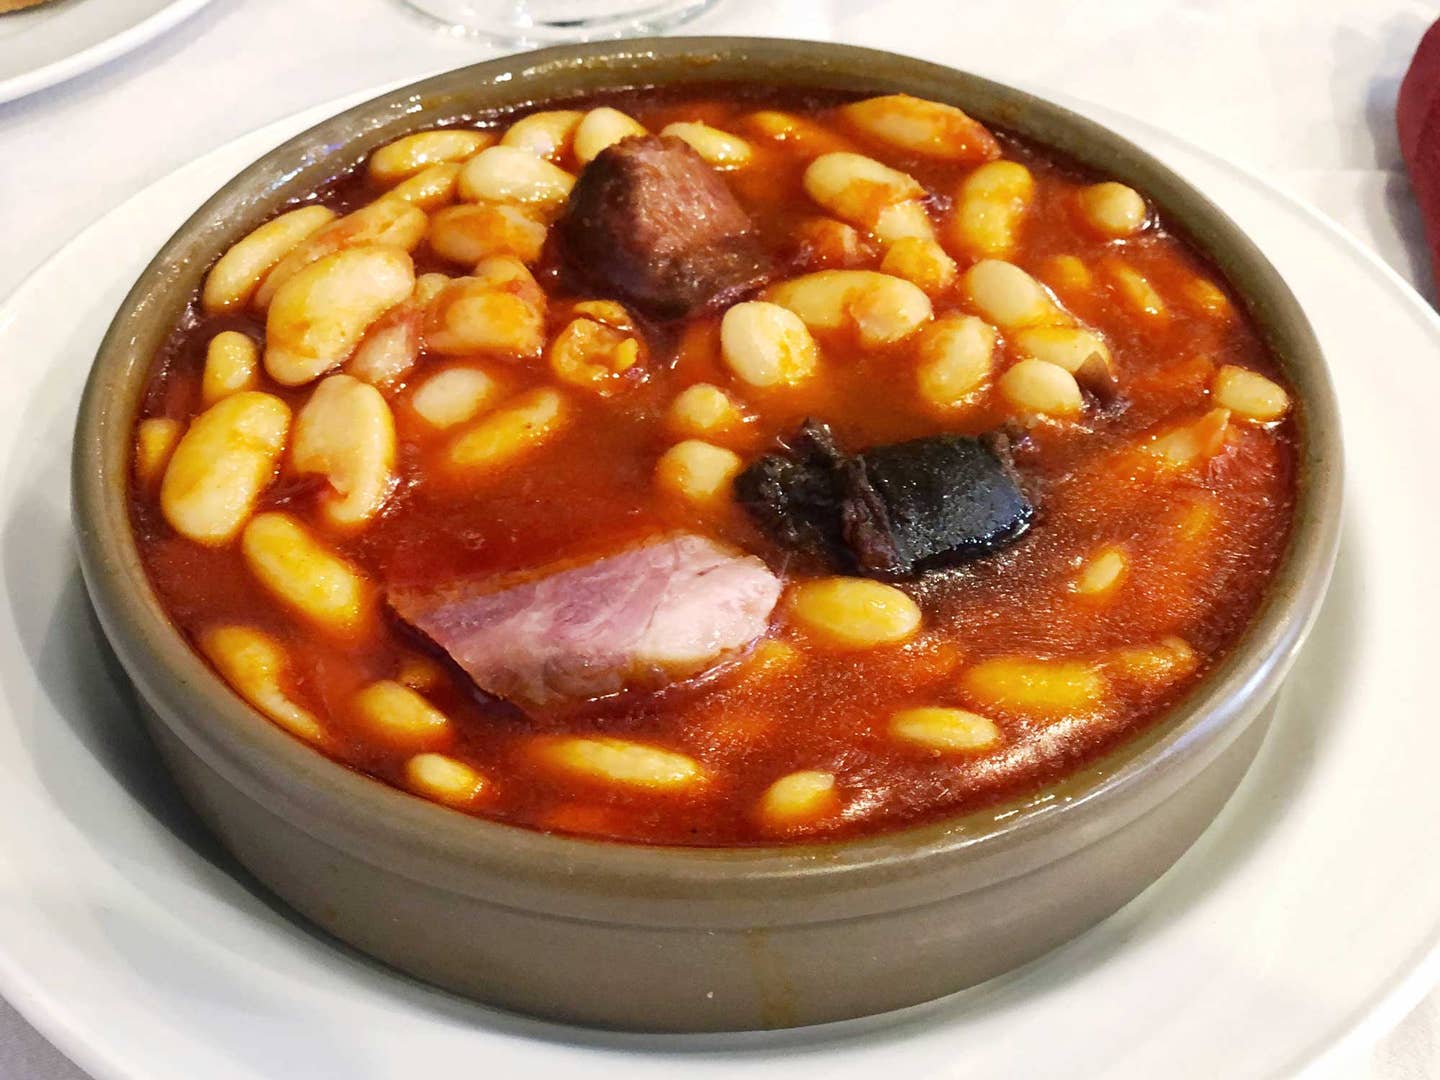 Fabada Asturiana - A comforting pork-and-beans stew from northern Spain.